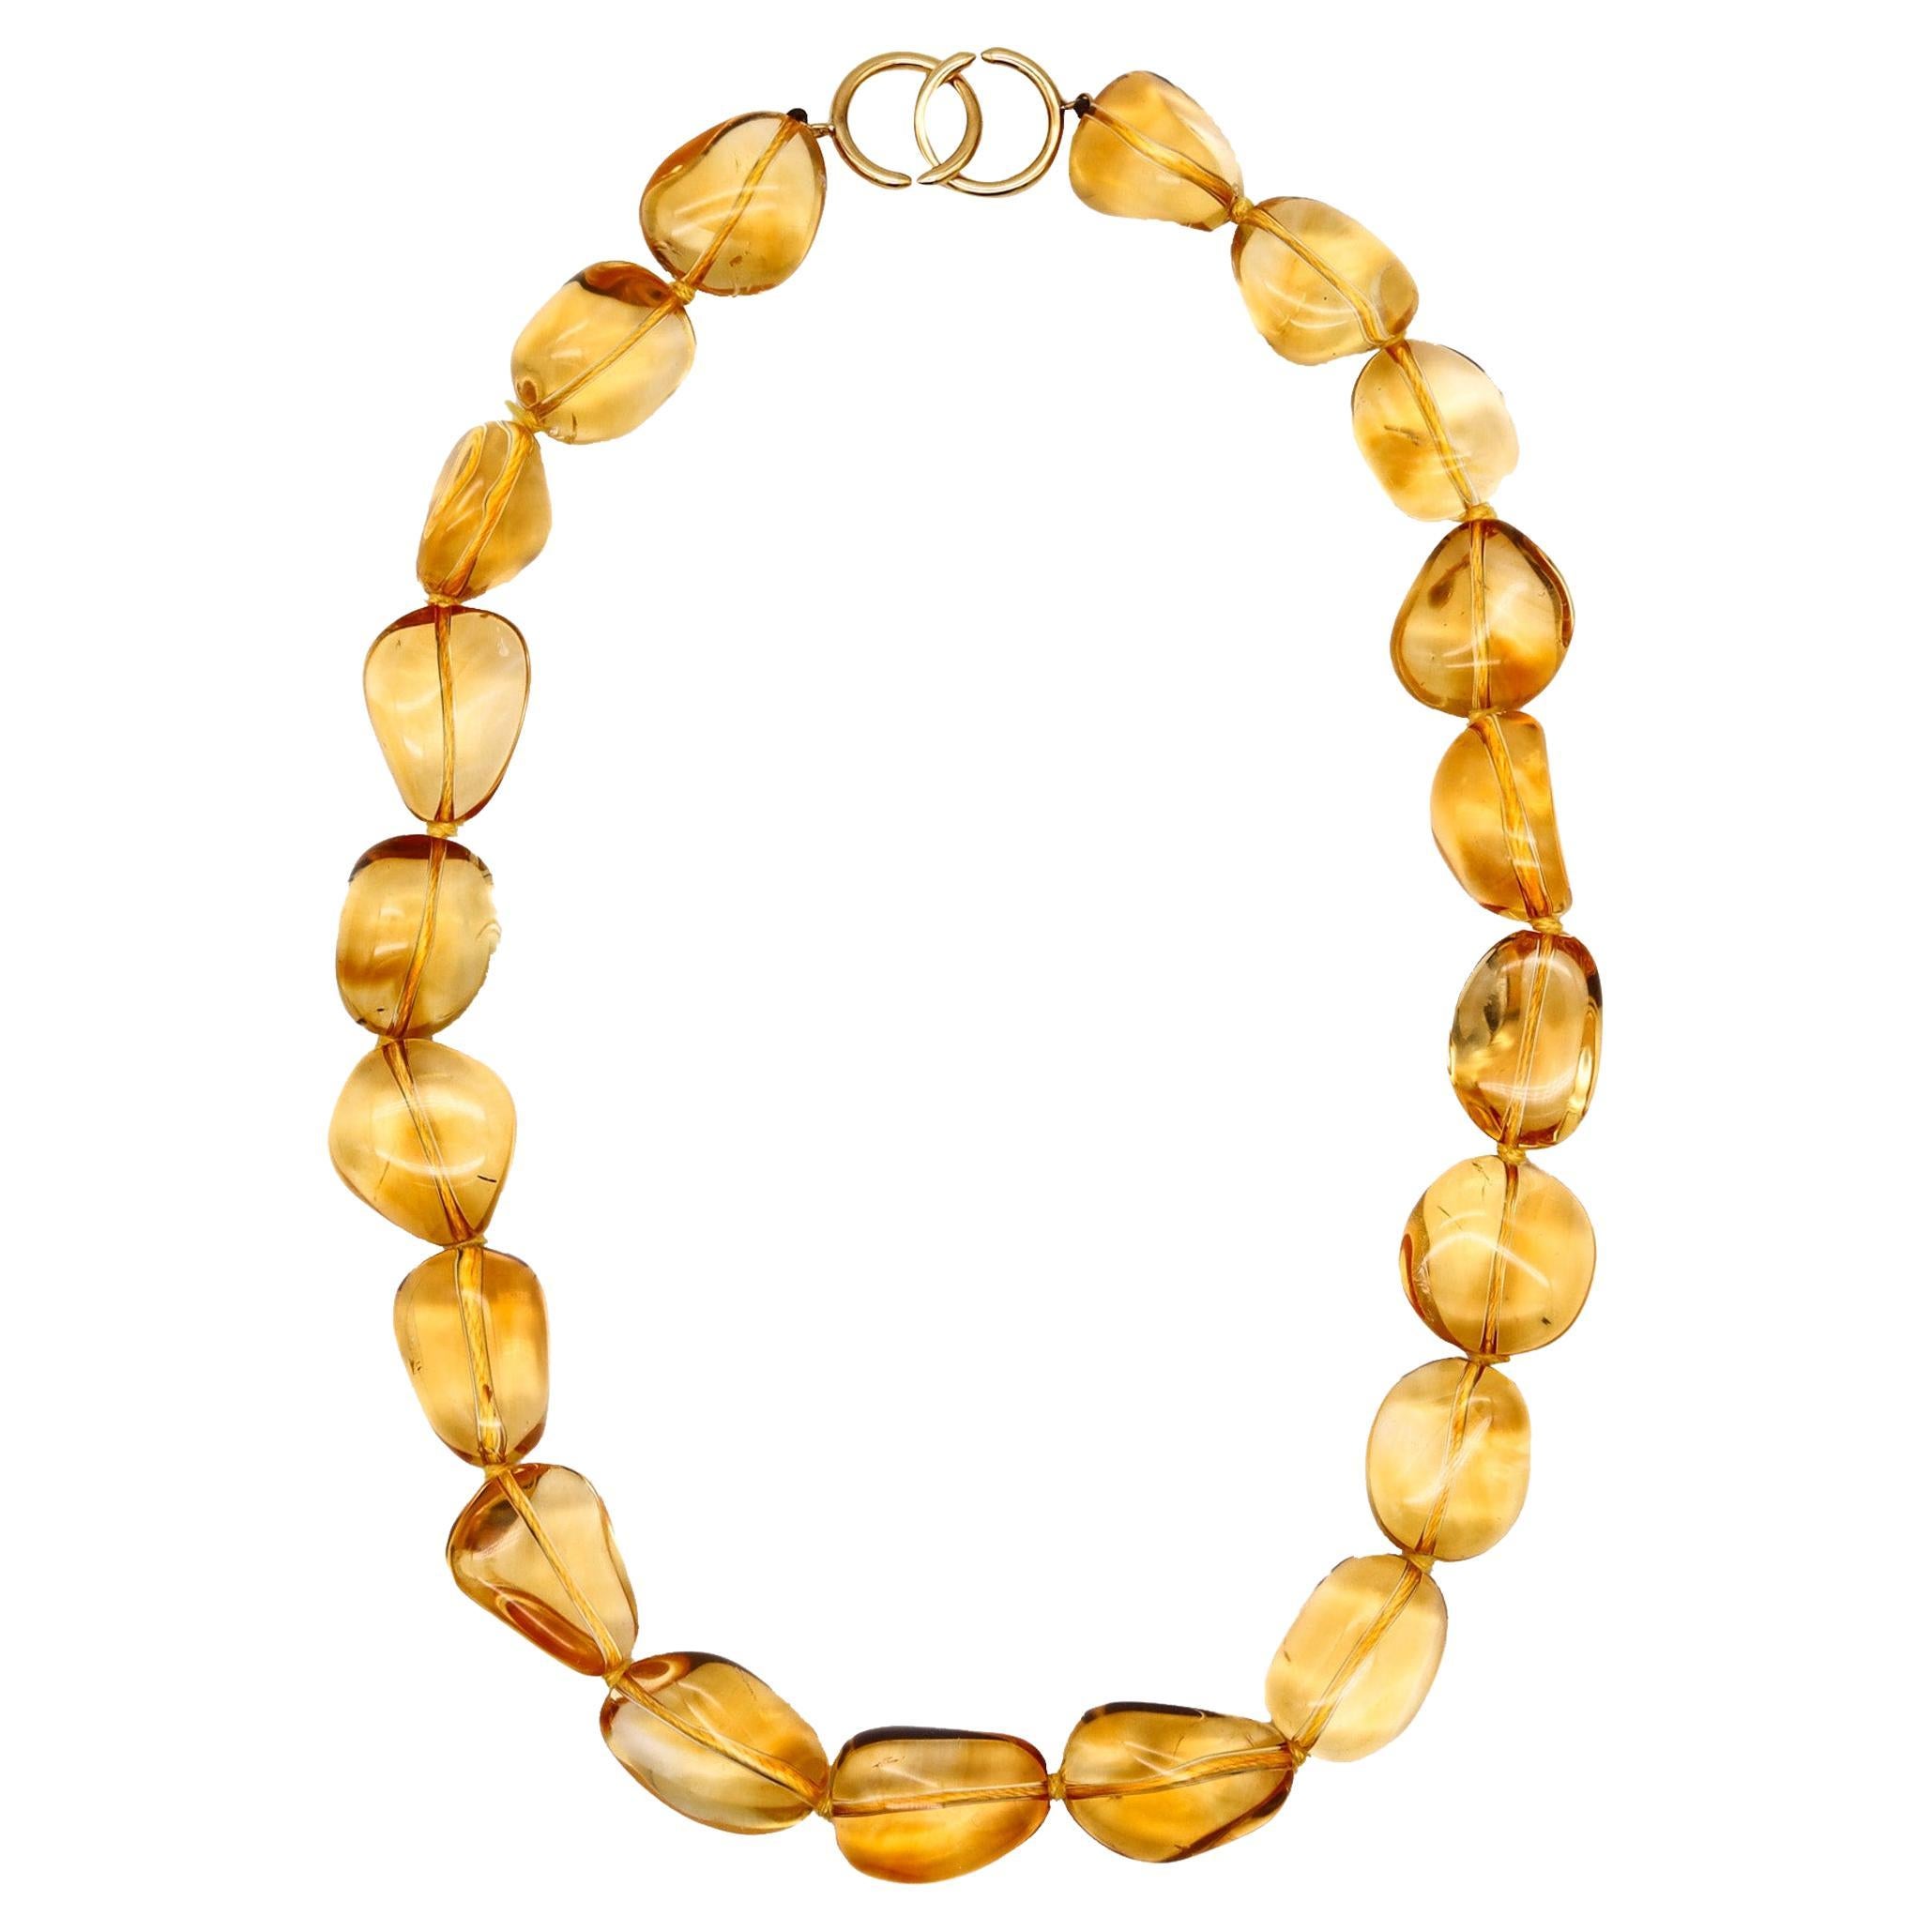 Tiffany & Co. by Paloma Picasso Necklace in 18 Karat Gold with 500ctw Citrines